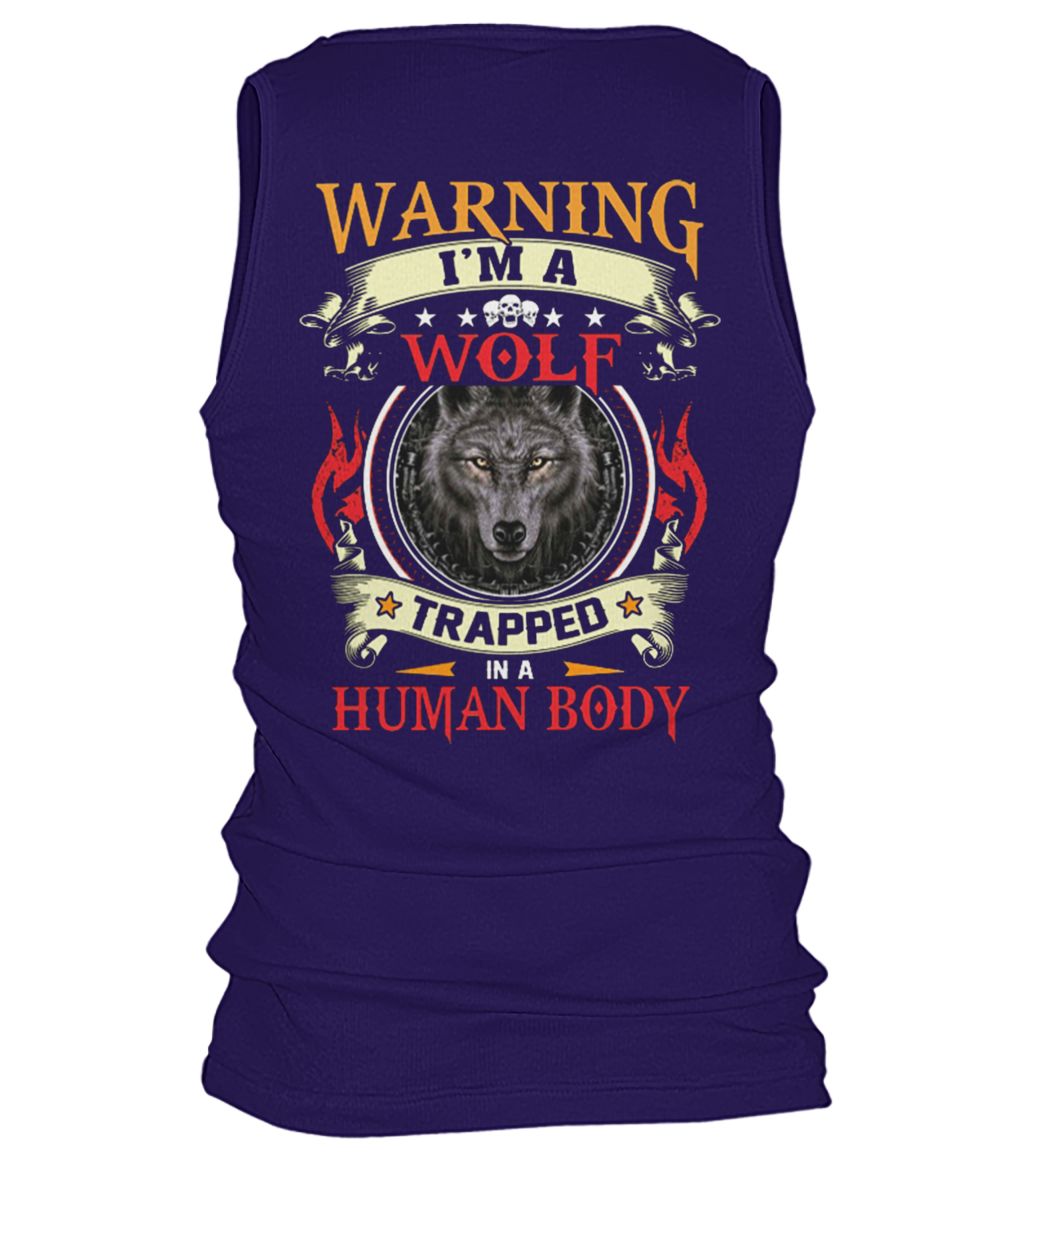 Warning I'm a wolf trapped in a human body men's tank top